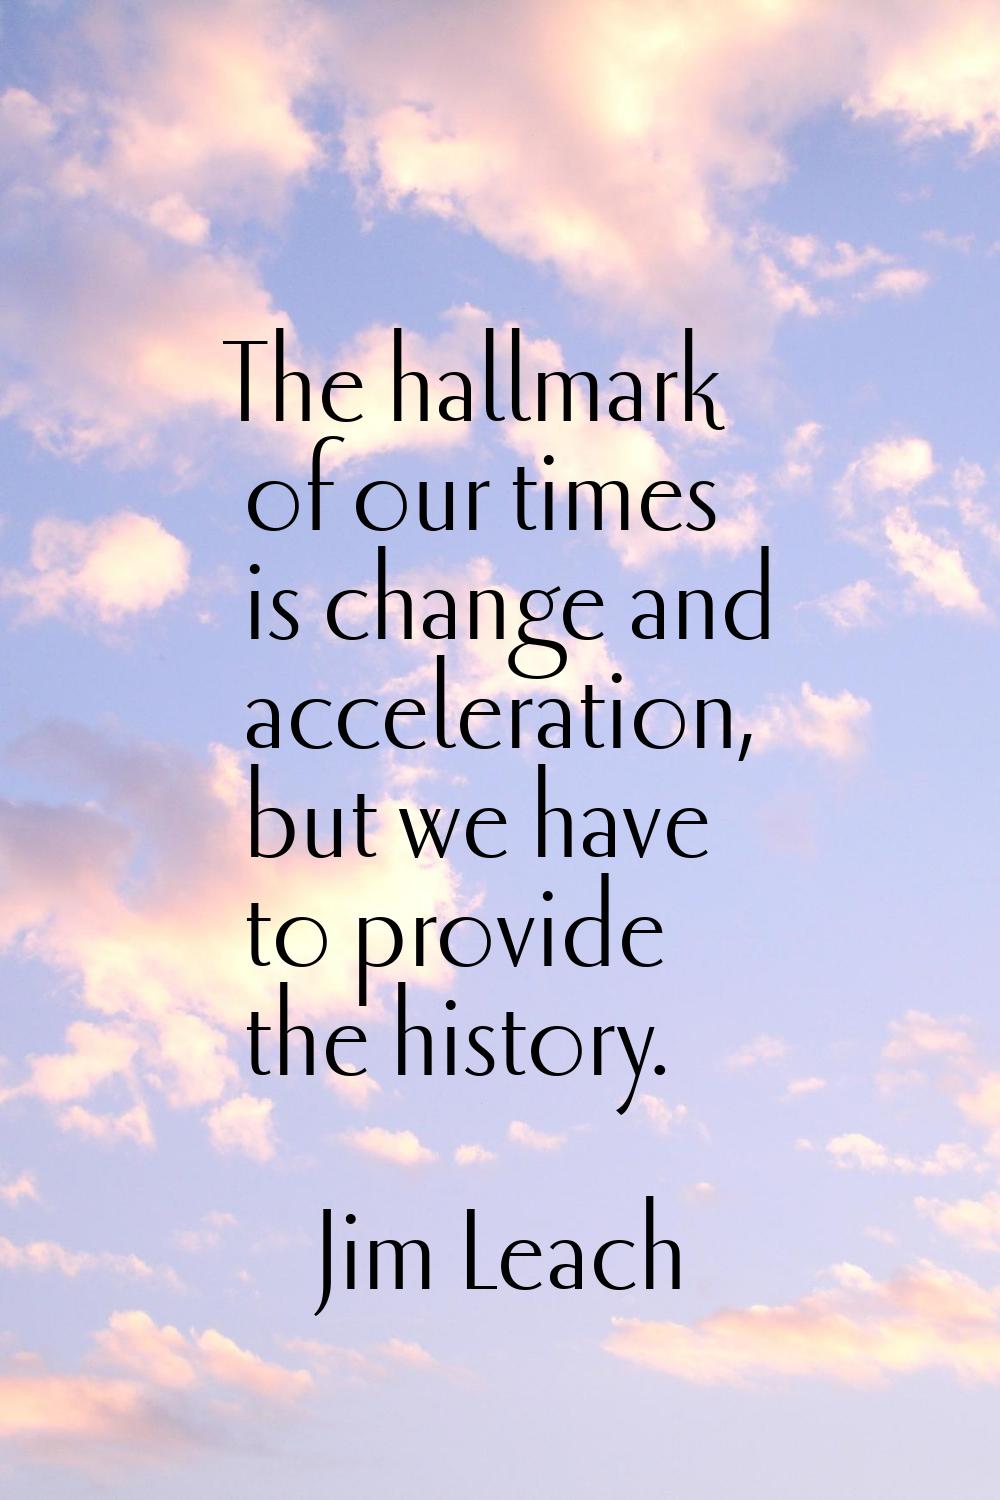 The hallmark of our times is change and acceleration, but we have to provide the history.